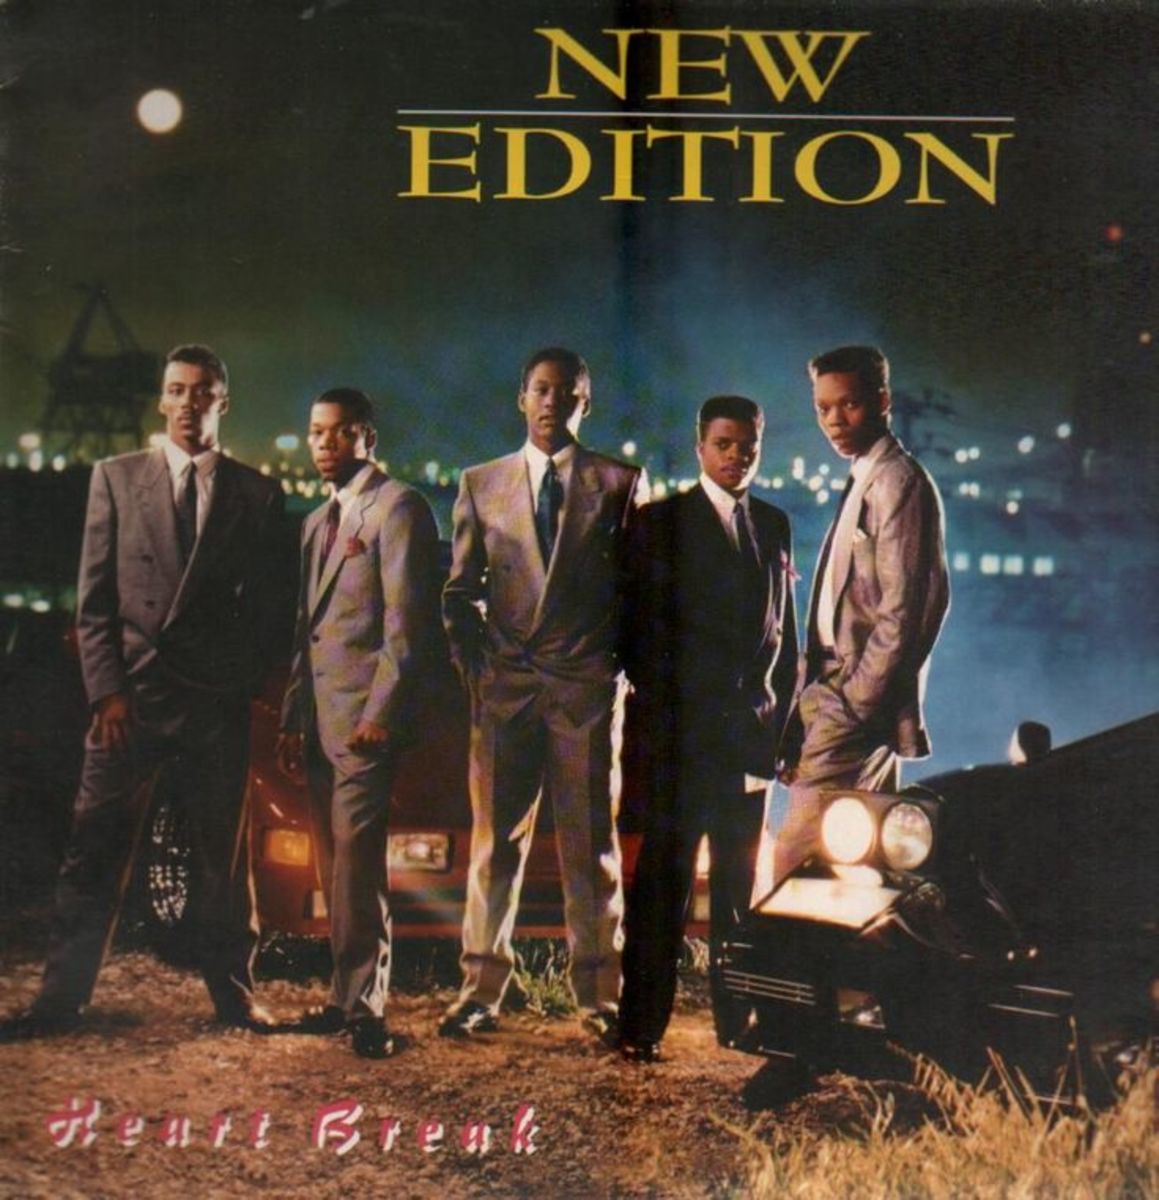 New Edition welcomes new addition, Johnny Gill in this suave night scene.